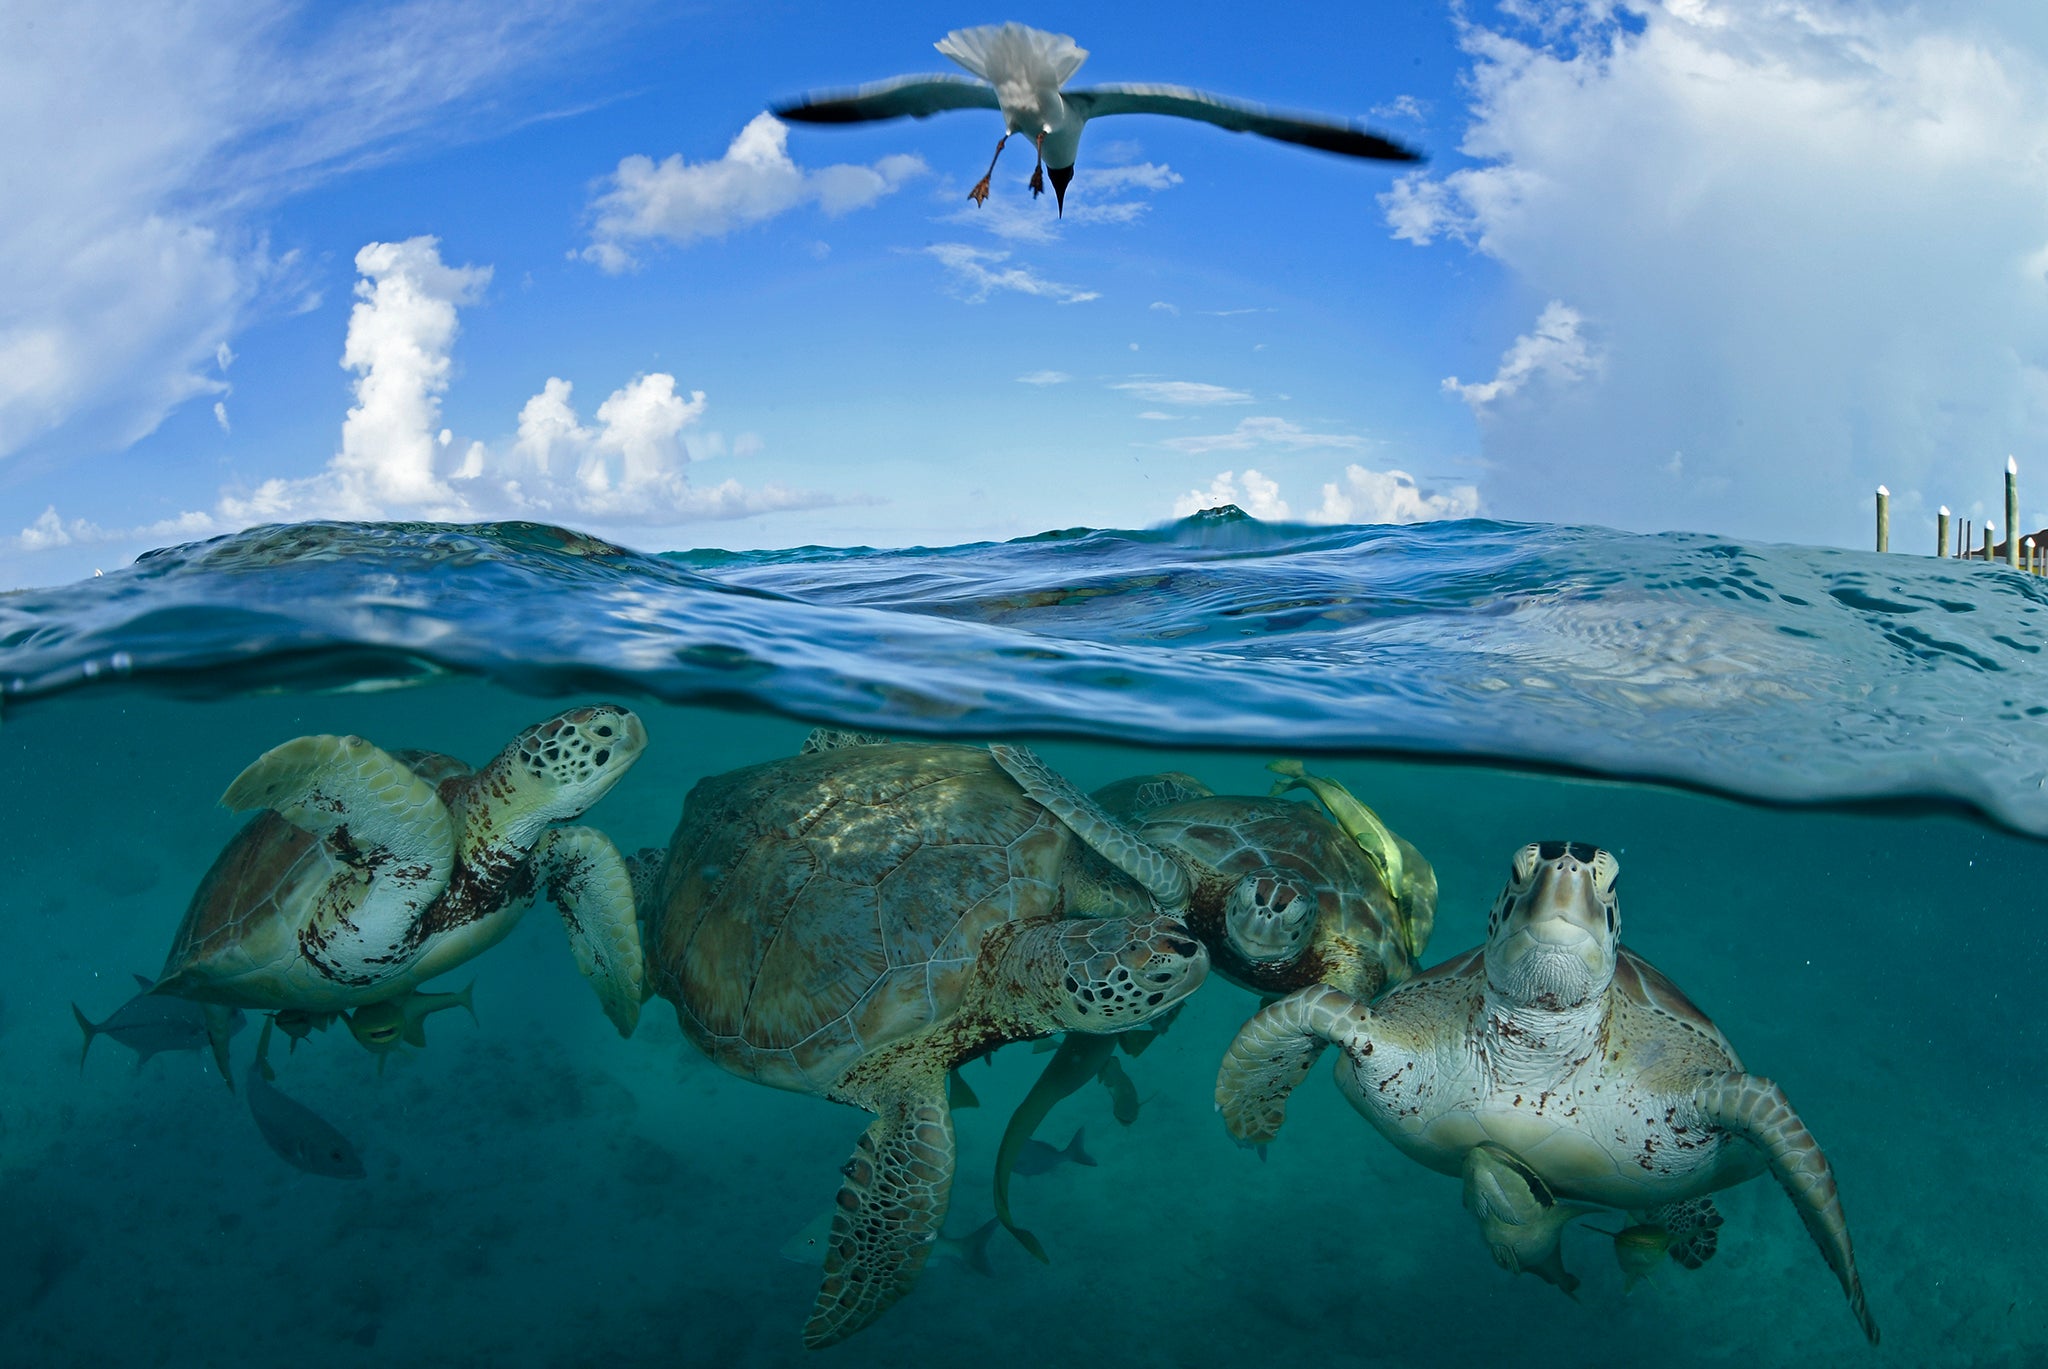 Endangered green sea turtles in Little Farmer’s Cay in the Bahamas